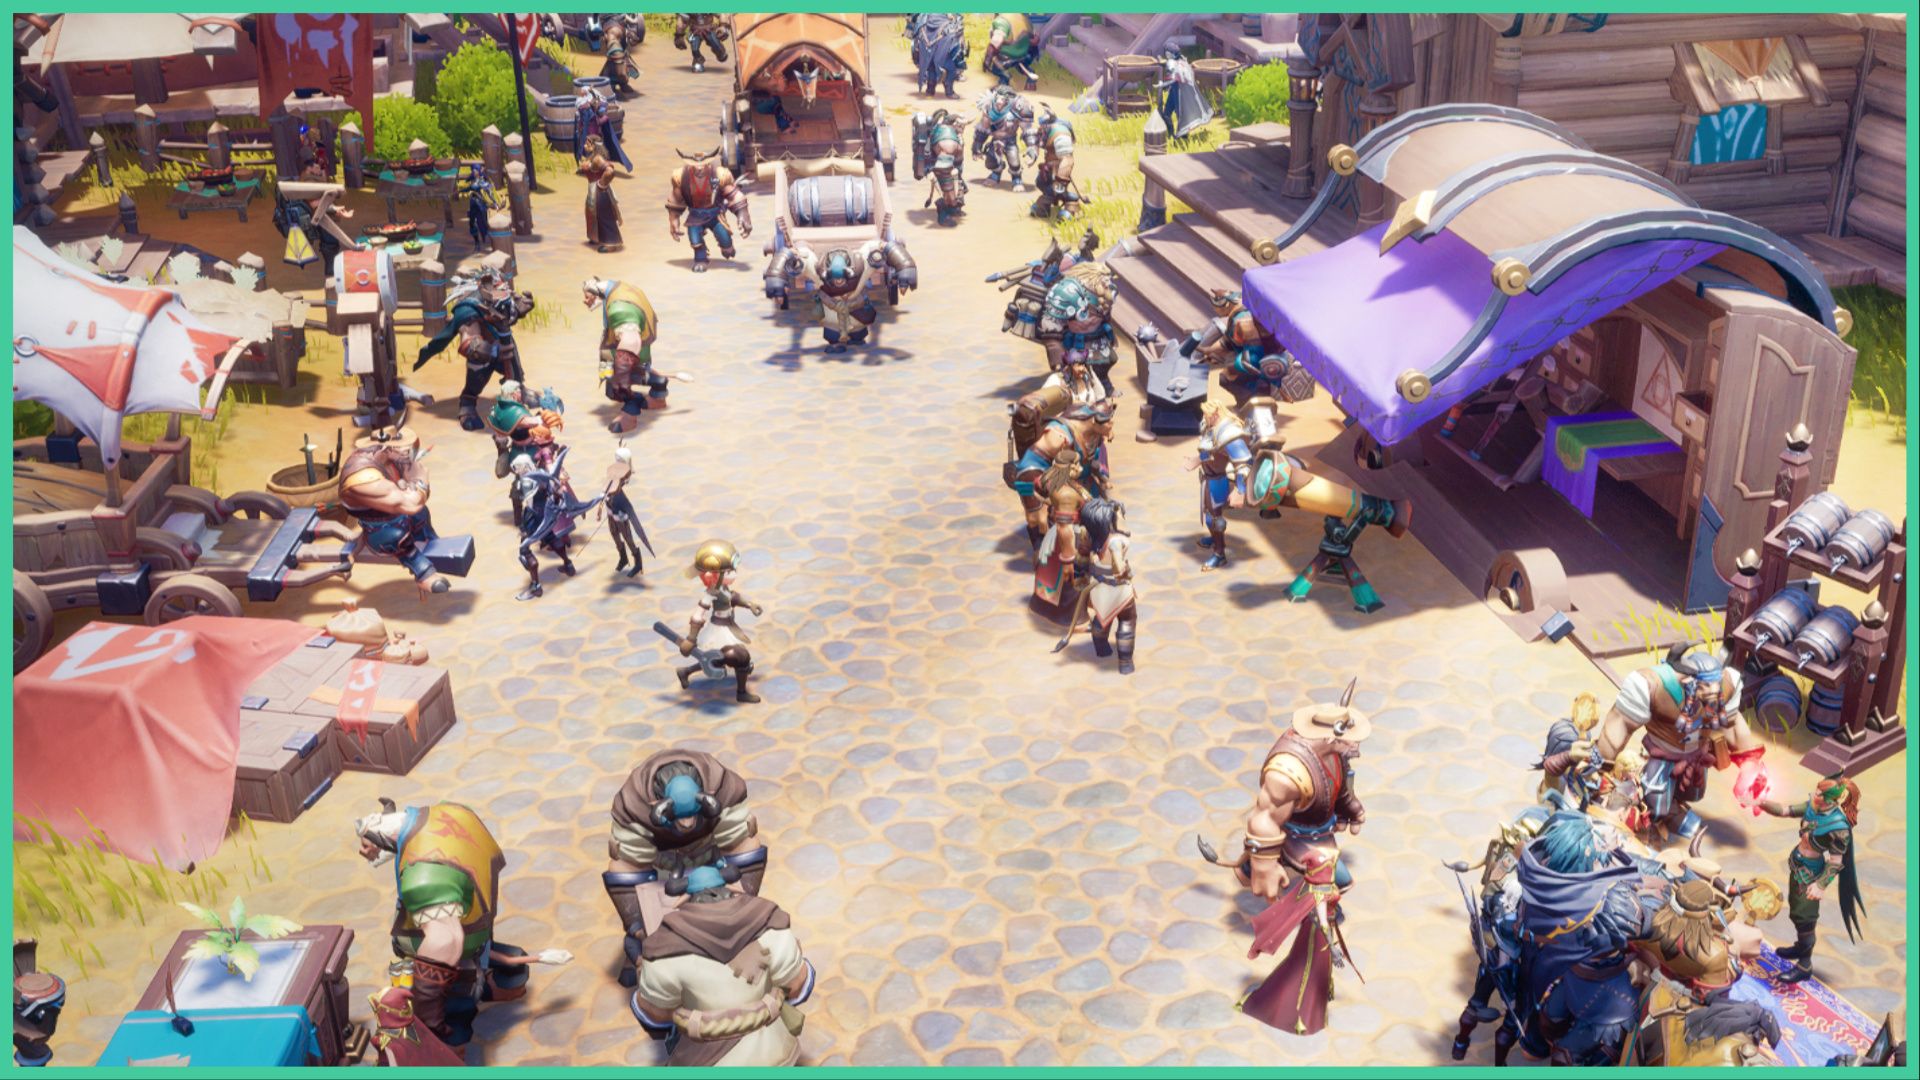 feature image for our tarisland tier list, the image features a promo photo from the game of residents going about their daily lives in the bustling town as they visit stalls and talk to each other, there are shops, people sitting around, and business owners selling products